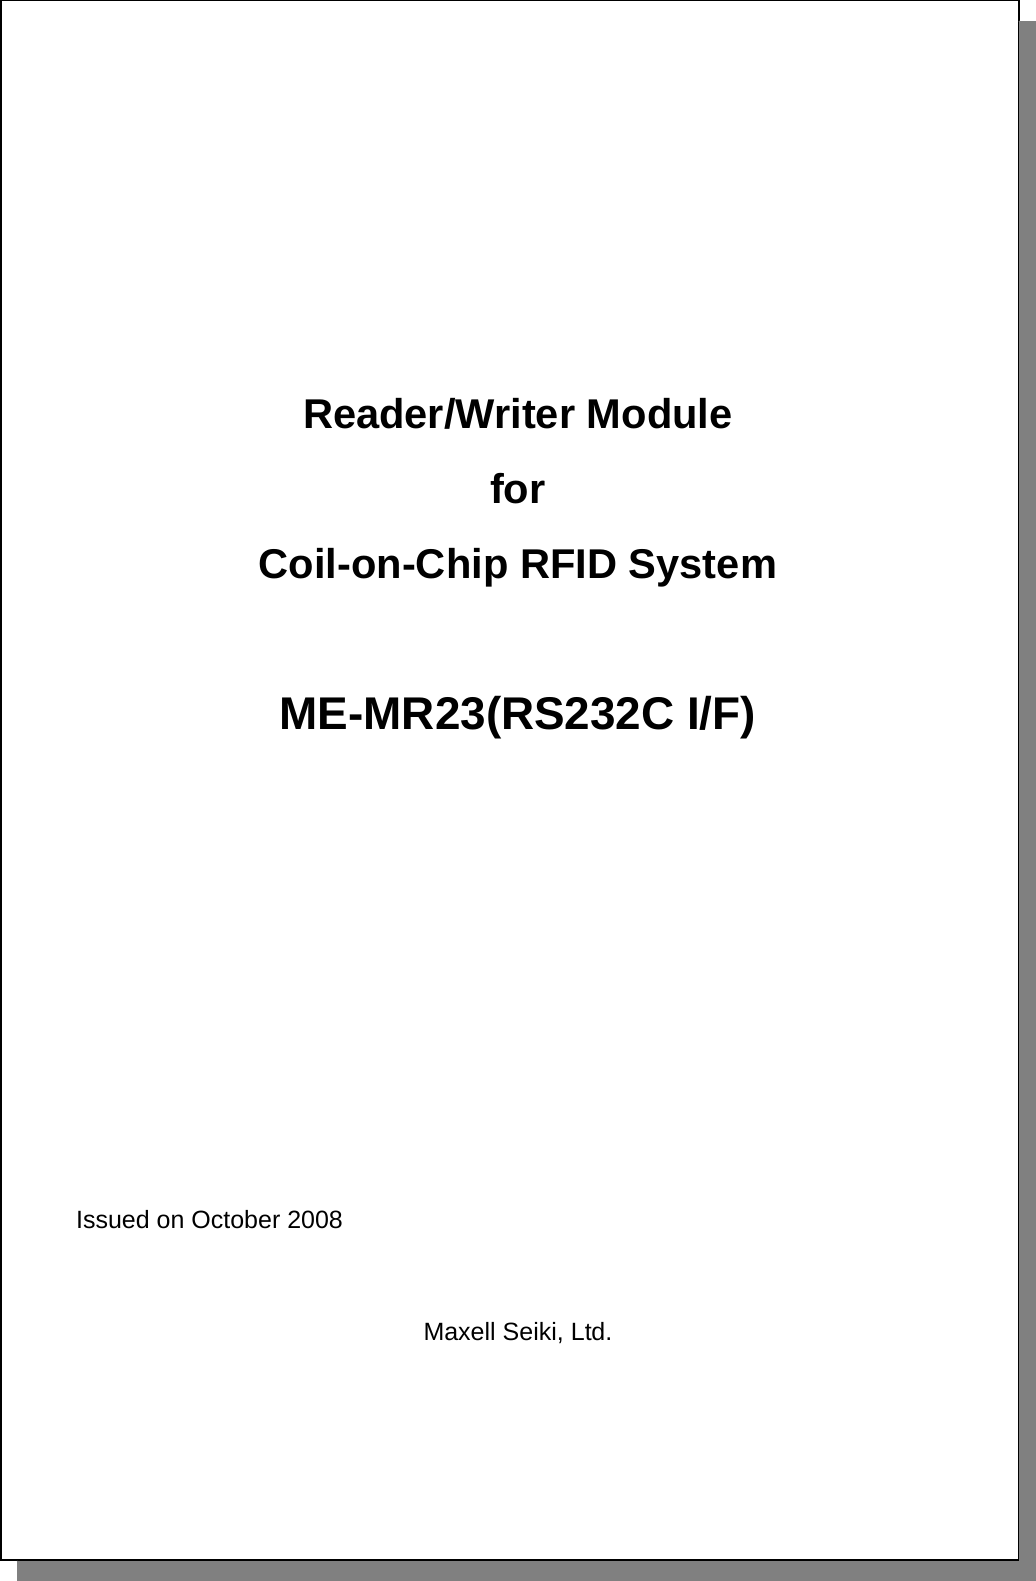           Reader/Writer Module for Coil-on-Chip RFID System   ME-MR23(RS232C I/F)             Issued on October 2008   Maxell Seiki, Ltd.     